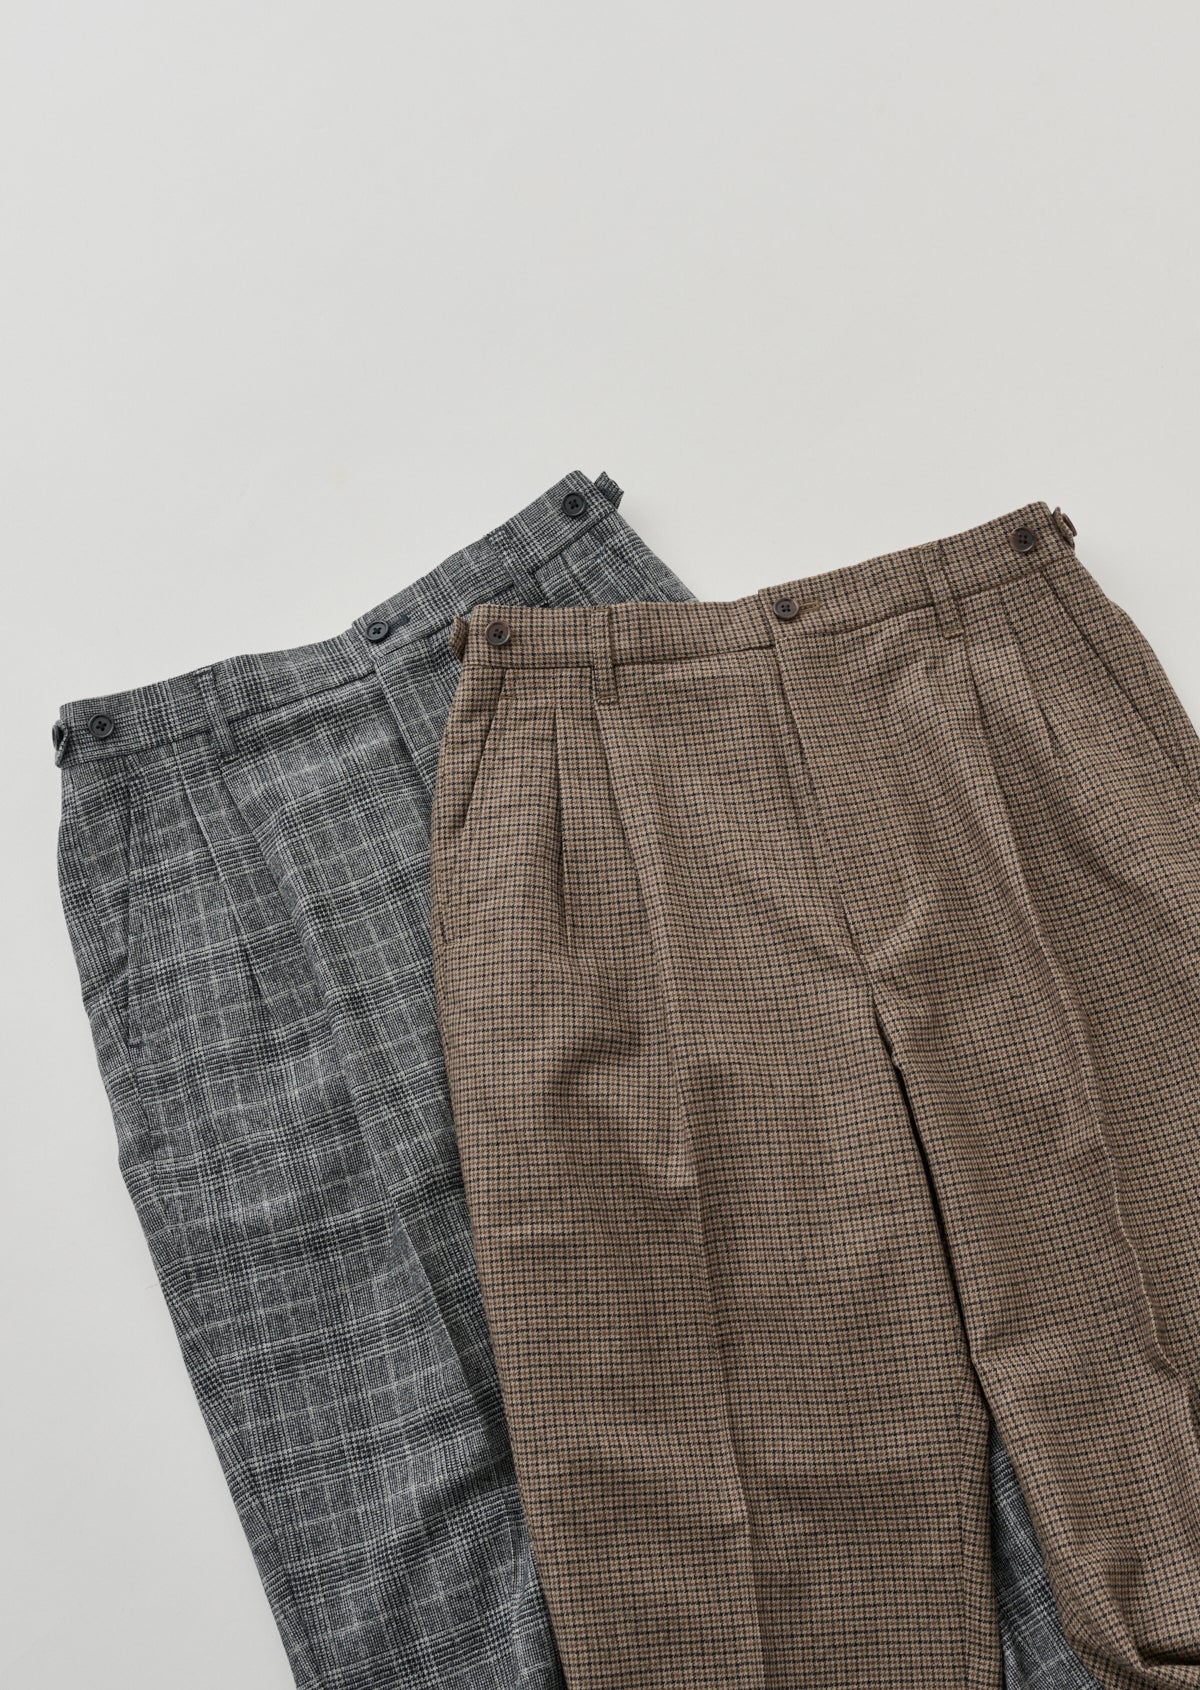 STRETCH FLANNEL TROUSERS BROWN 8233-1403